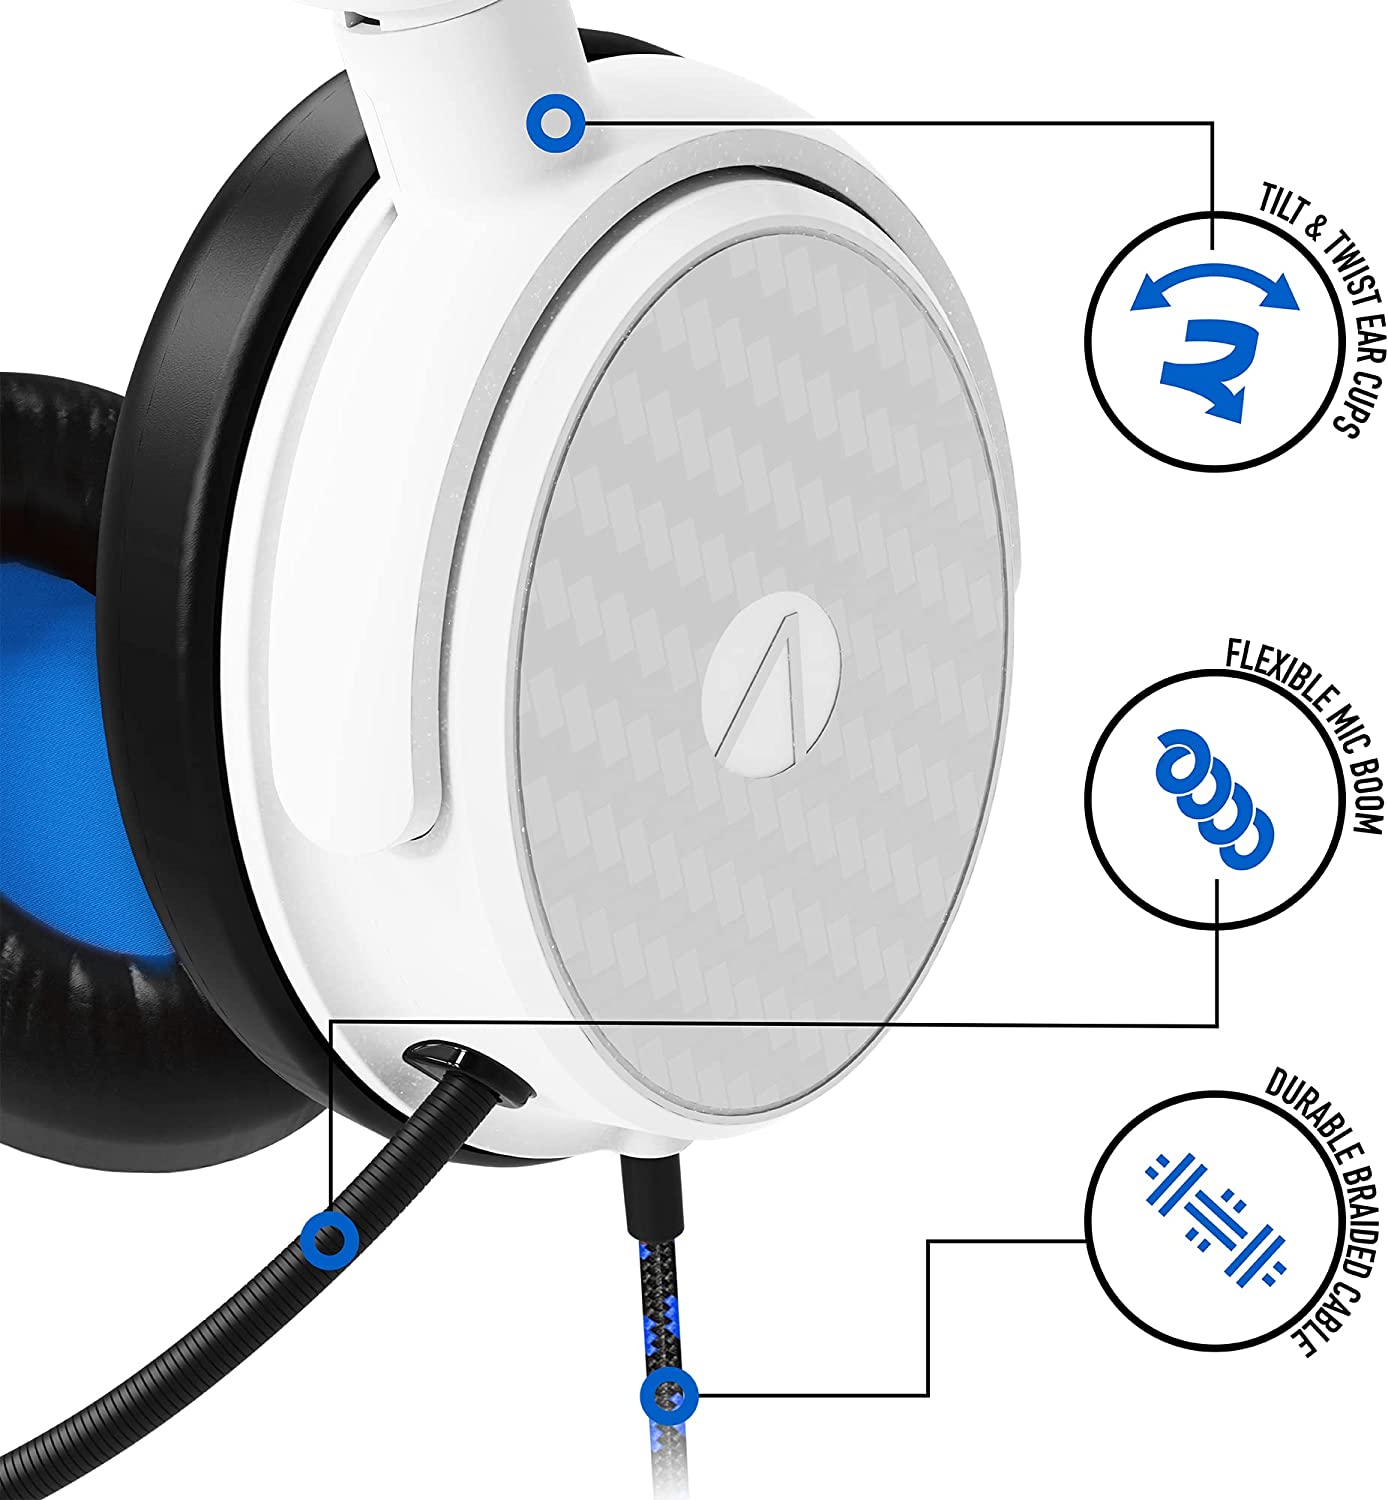 Stealth C6-100 Gaming Headset (White/Blue)